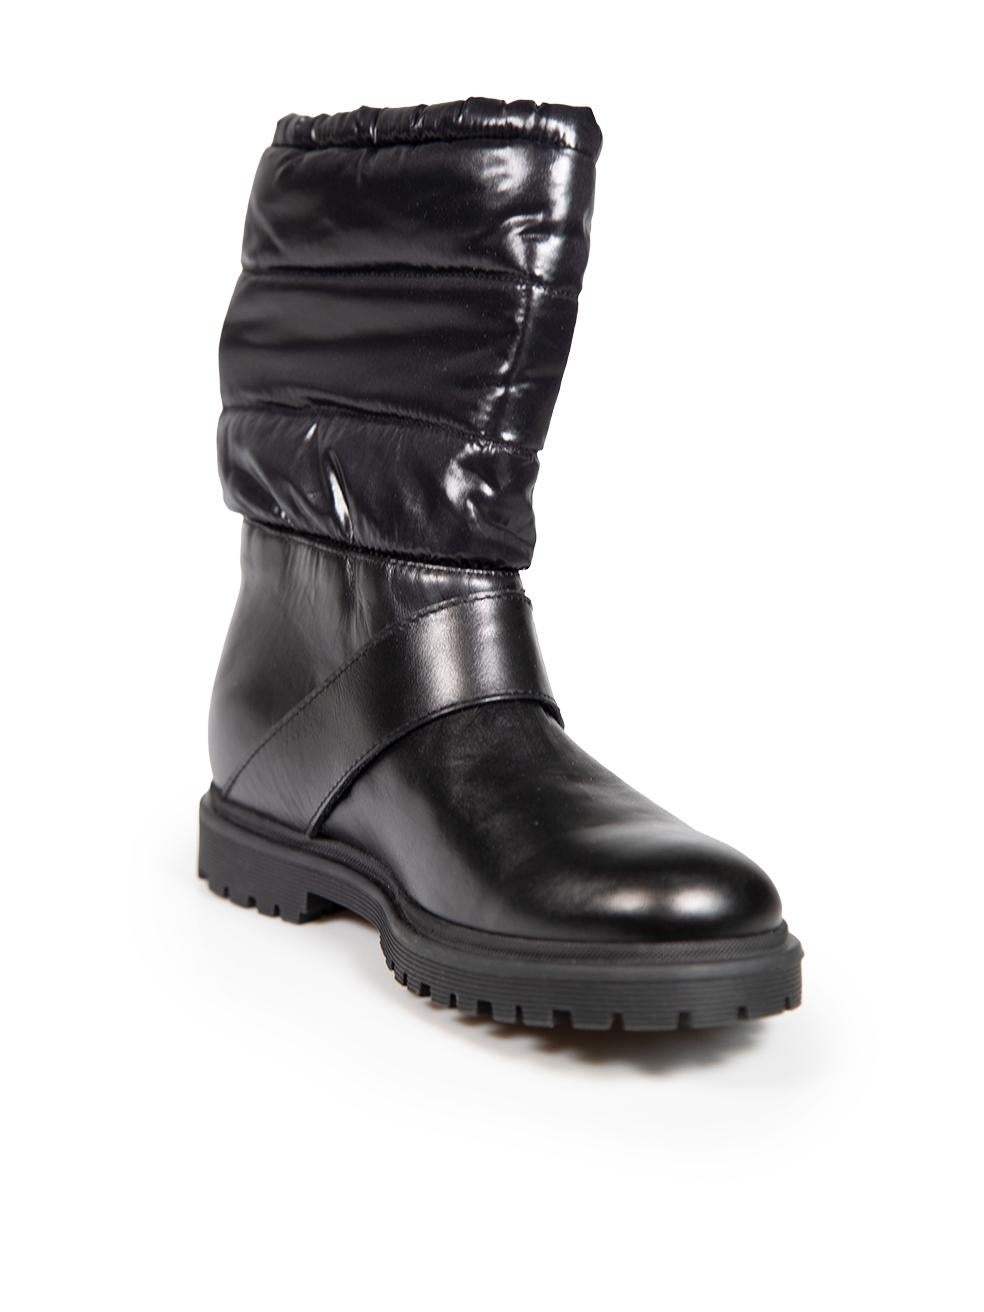 CONDITION is Never worn. No visible wear to boots is evident on this new Moncler designer resale item.
 
 
 
 Details
 
 
 Black
 
 Leather
 
 Snow boots
 
 Synthetic puffer top panel
 
 Drawstring tie
 
 Round toe
 
 Velcro strap
 
 
 
 
 
 Made in